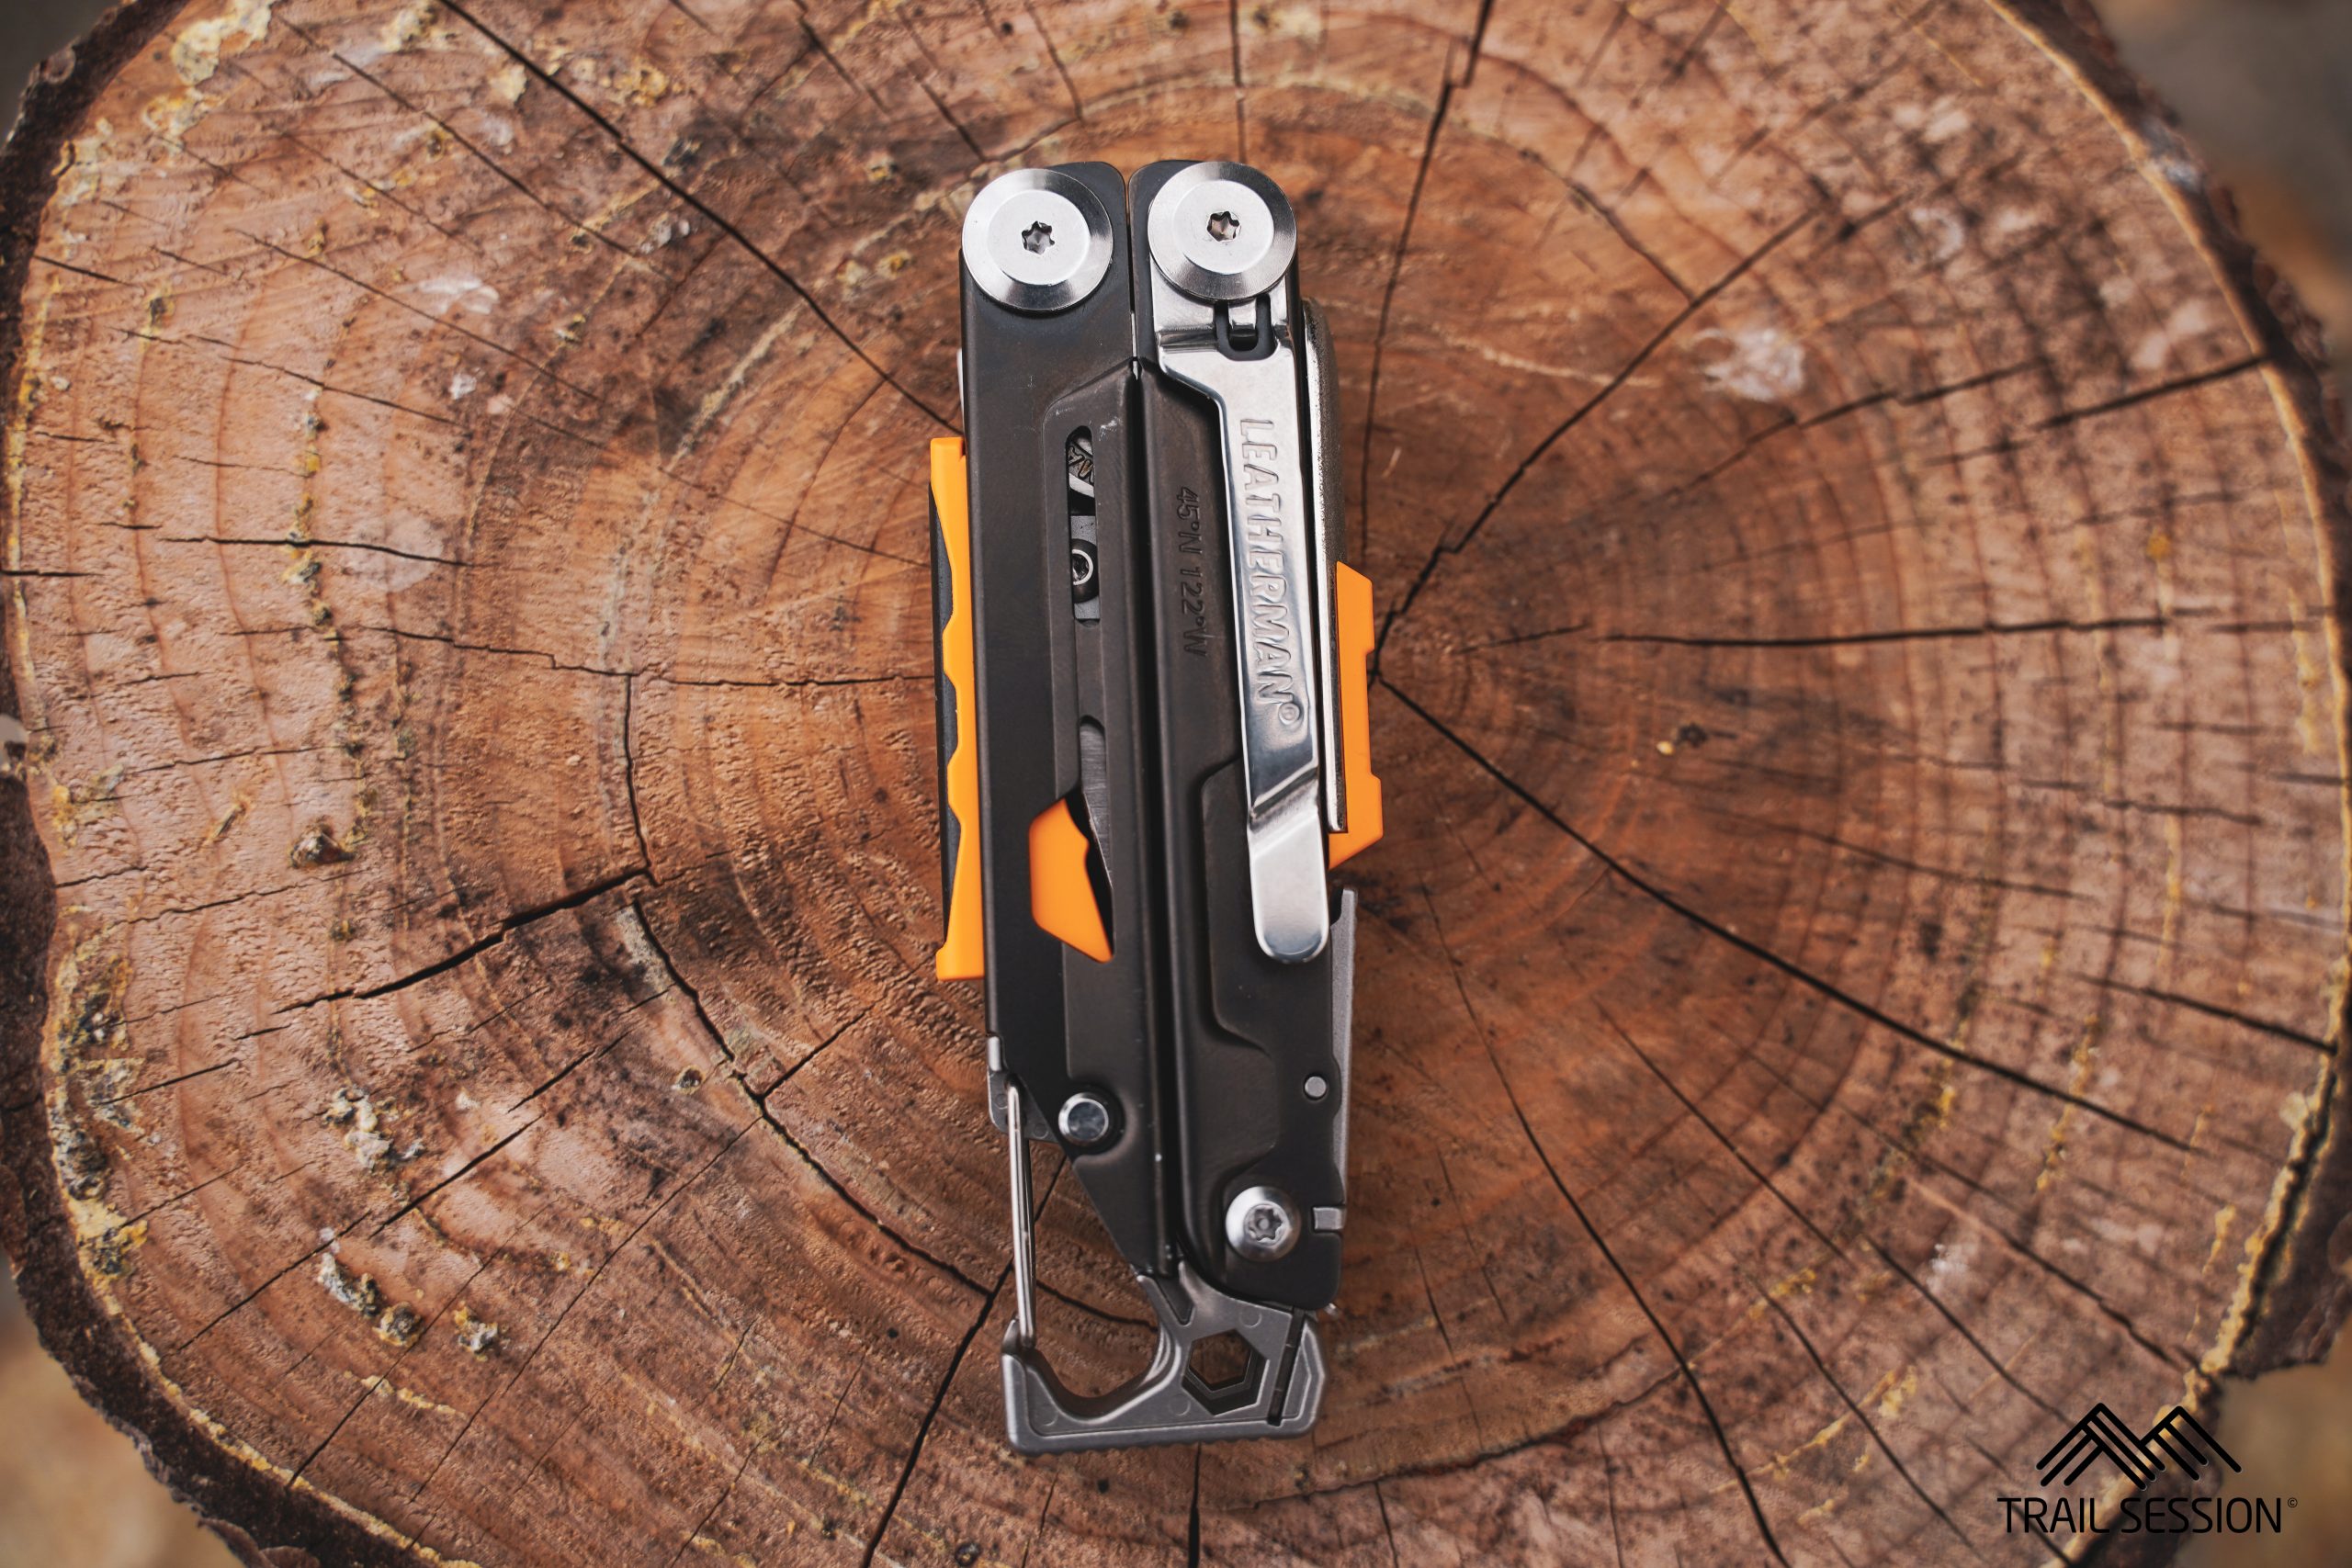 Outil Leatherman Signal